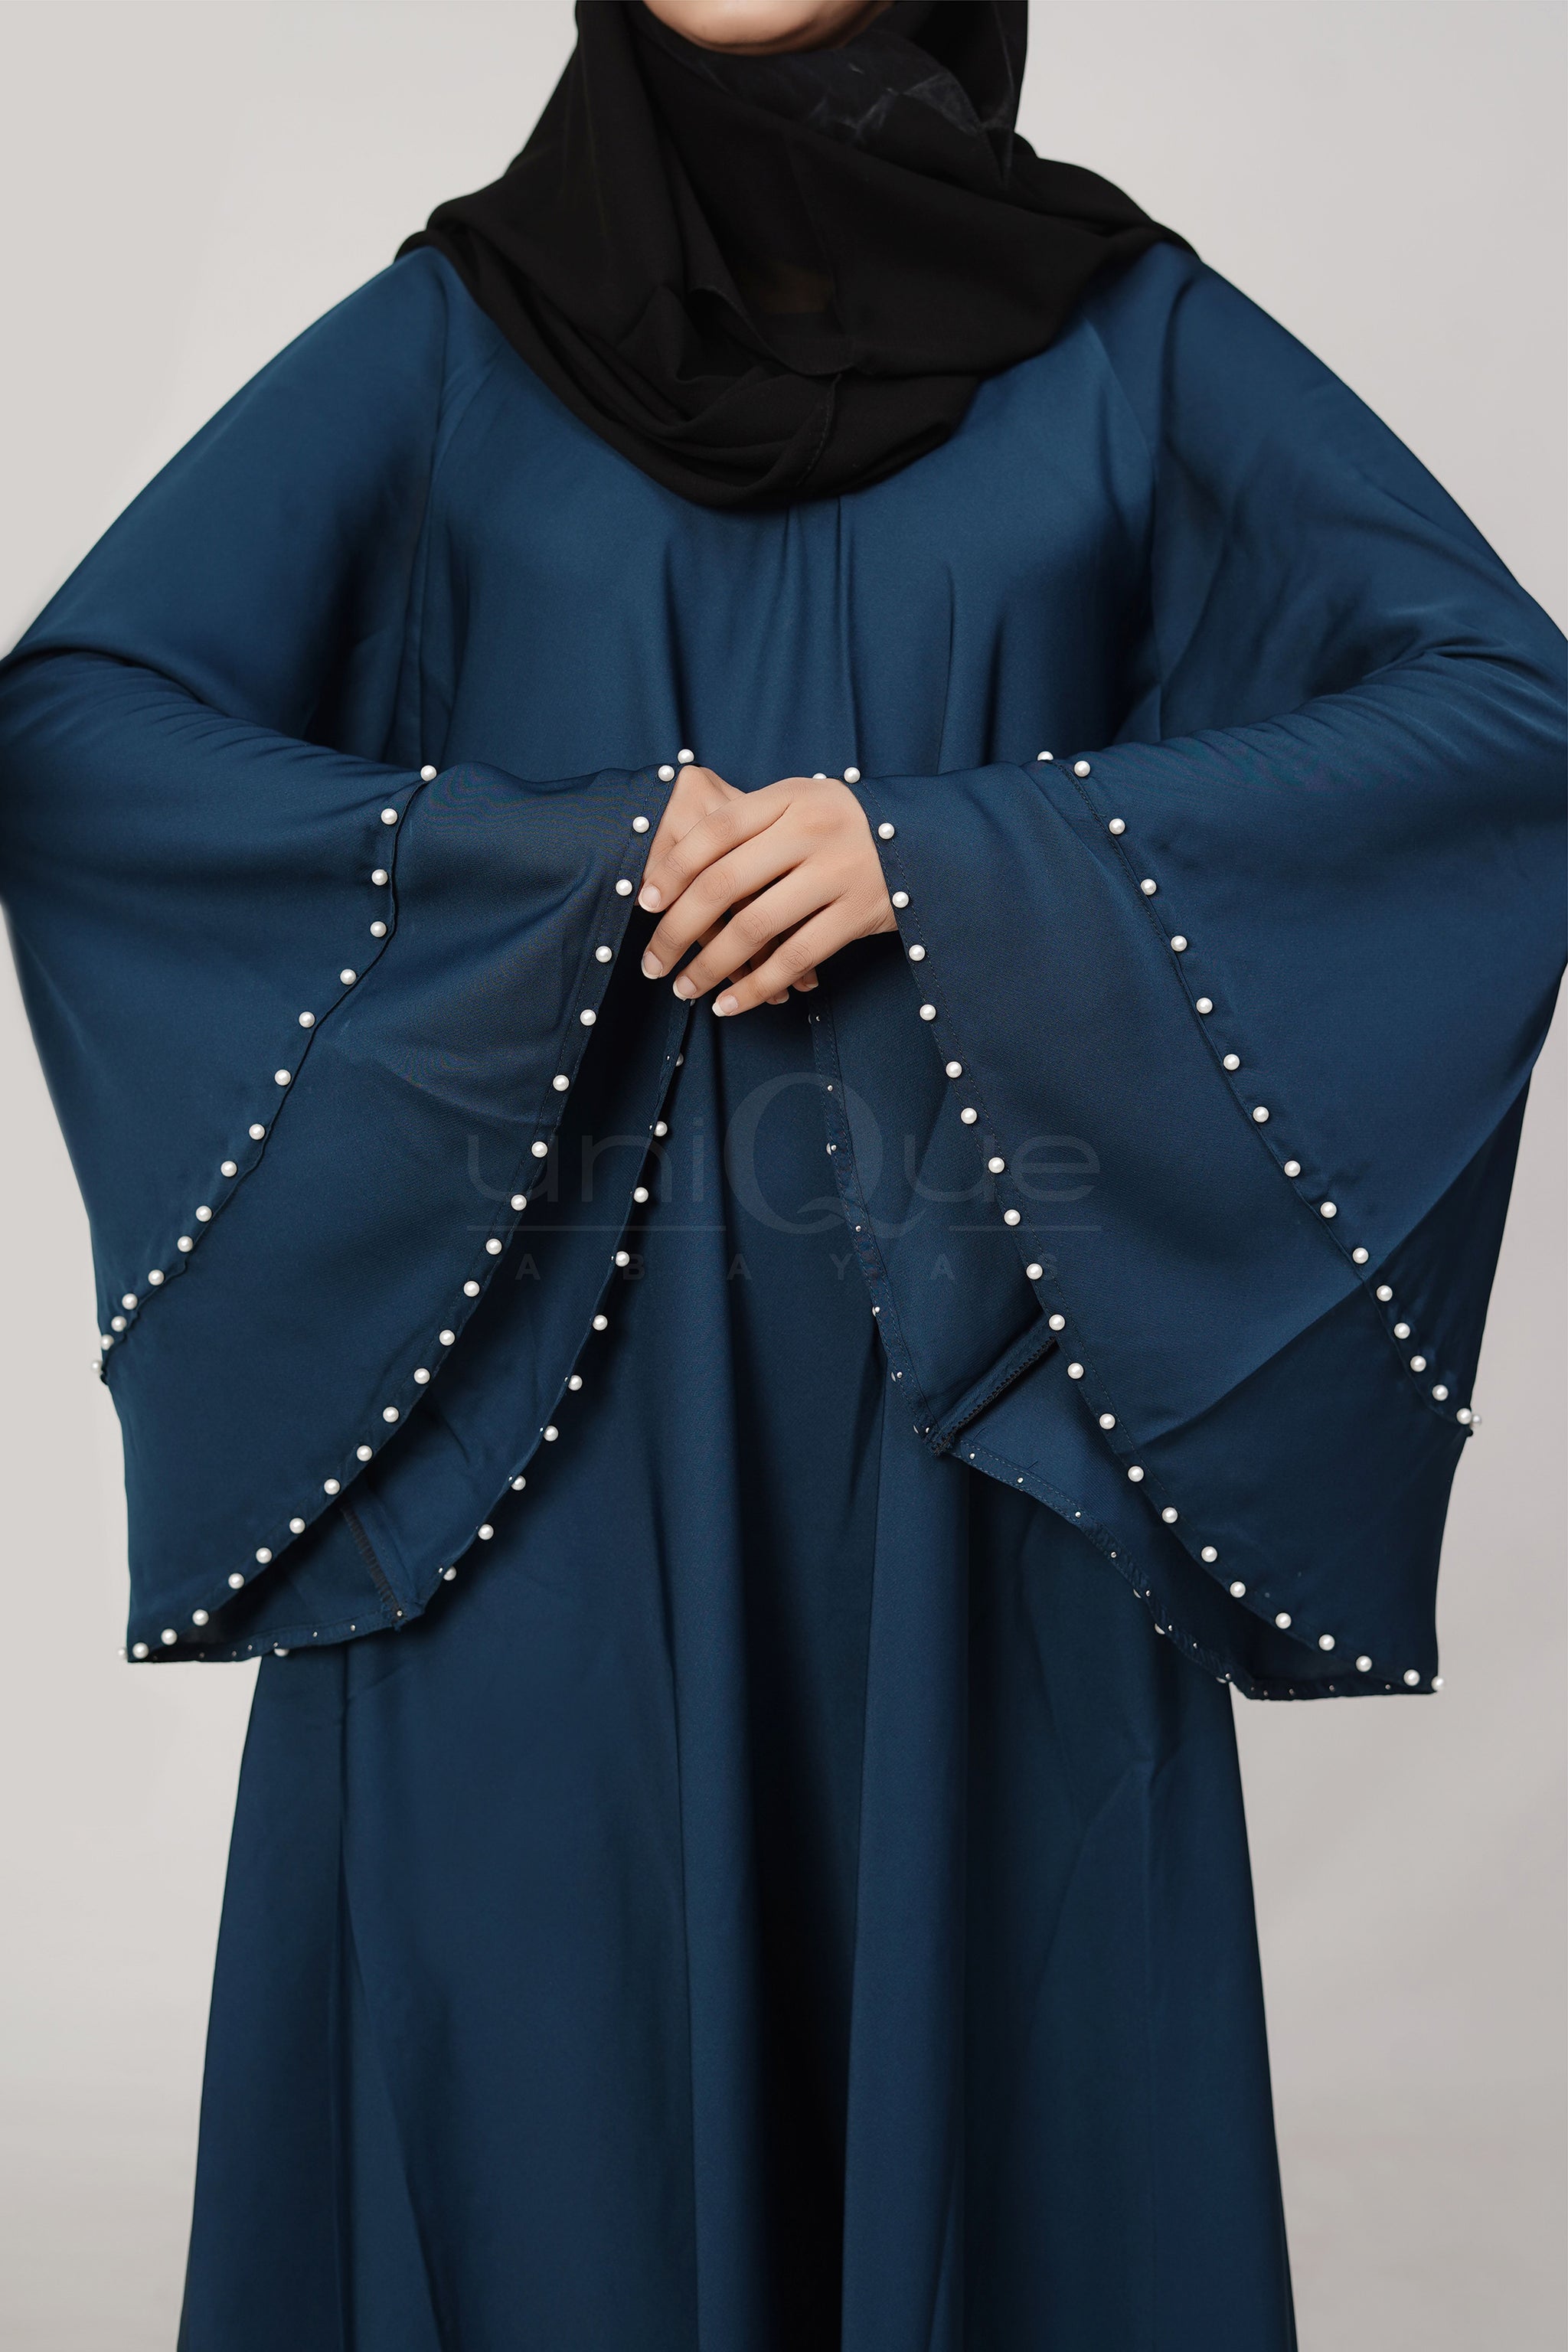 Pearl Umbrella Blue Abaya by Uniquewallart Abaya for Women, Front Side Close-Up Detailed